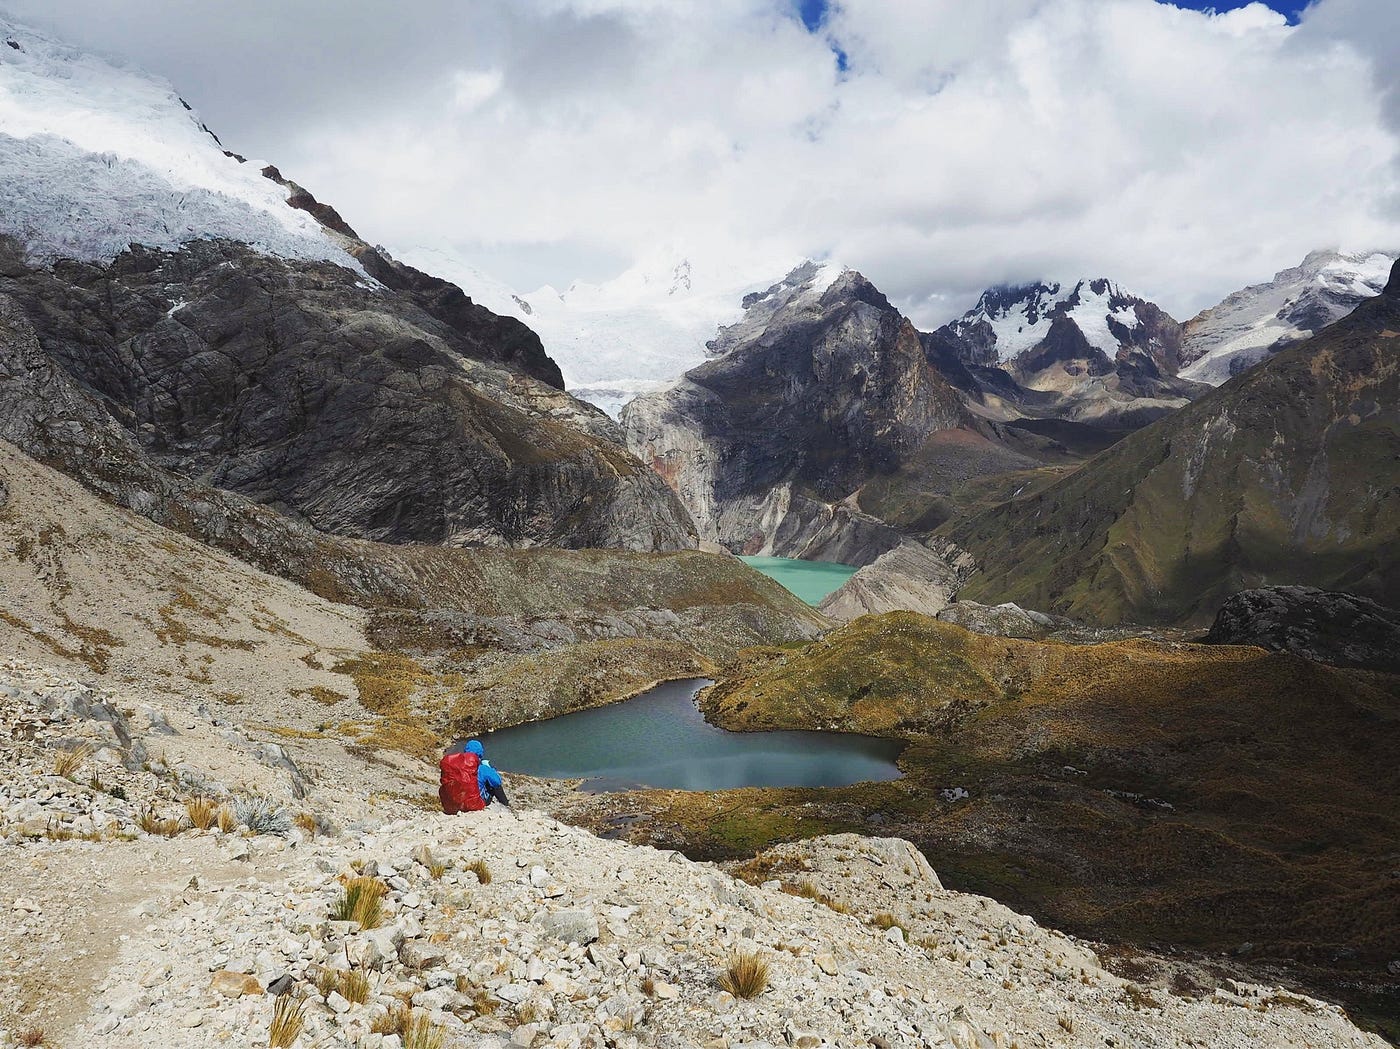 Trekking the Alpamayo in Peru independently / unguided | by Andy Hovey |  Medium